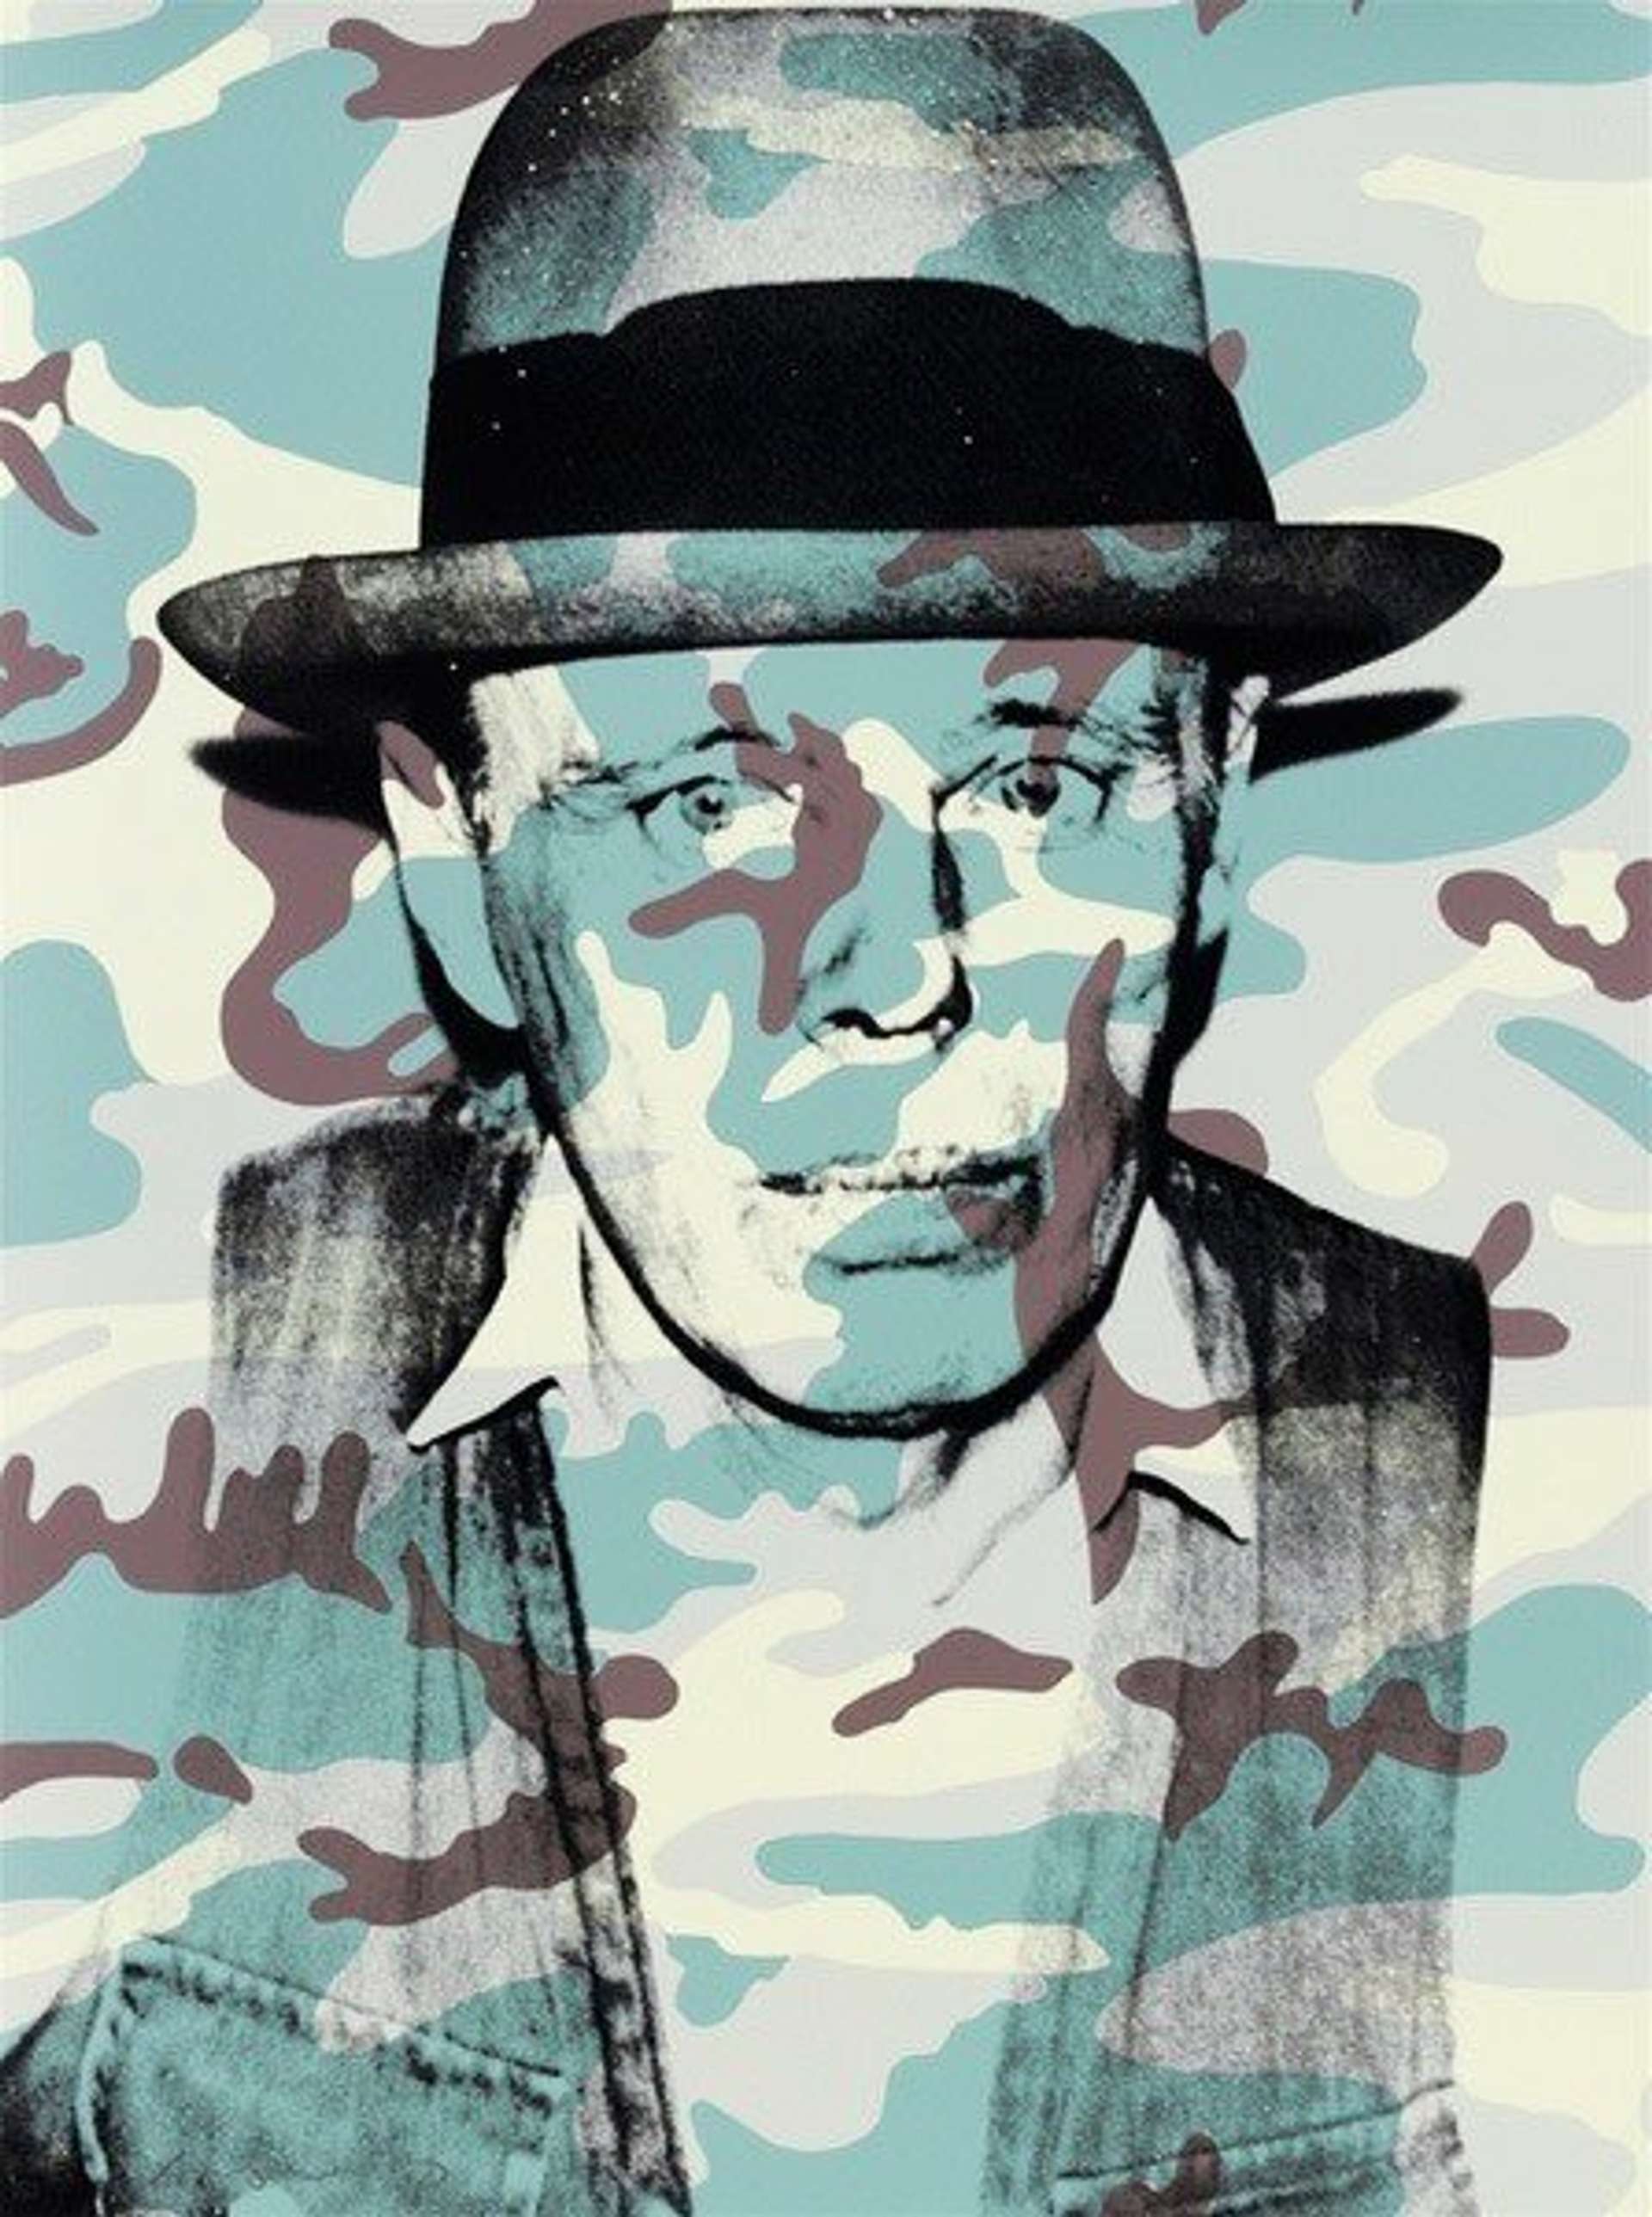 10 Facts About Andy Warhol's Joseph Beuys